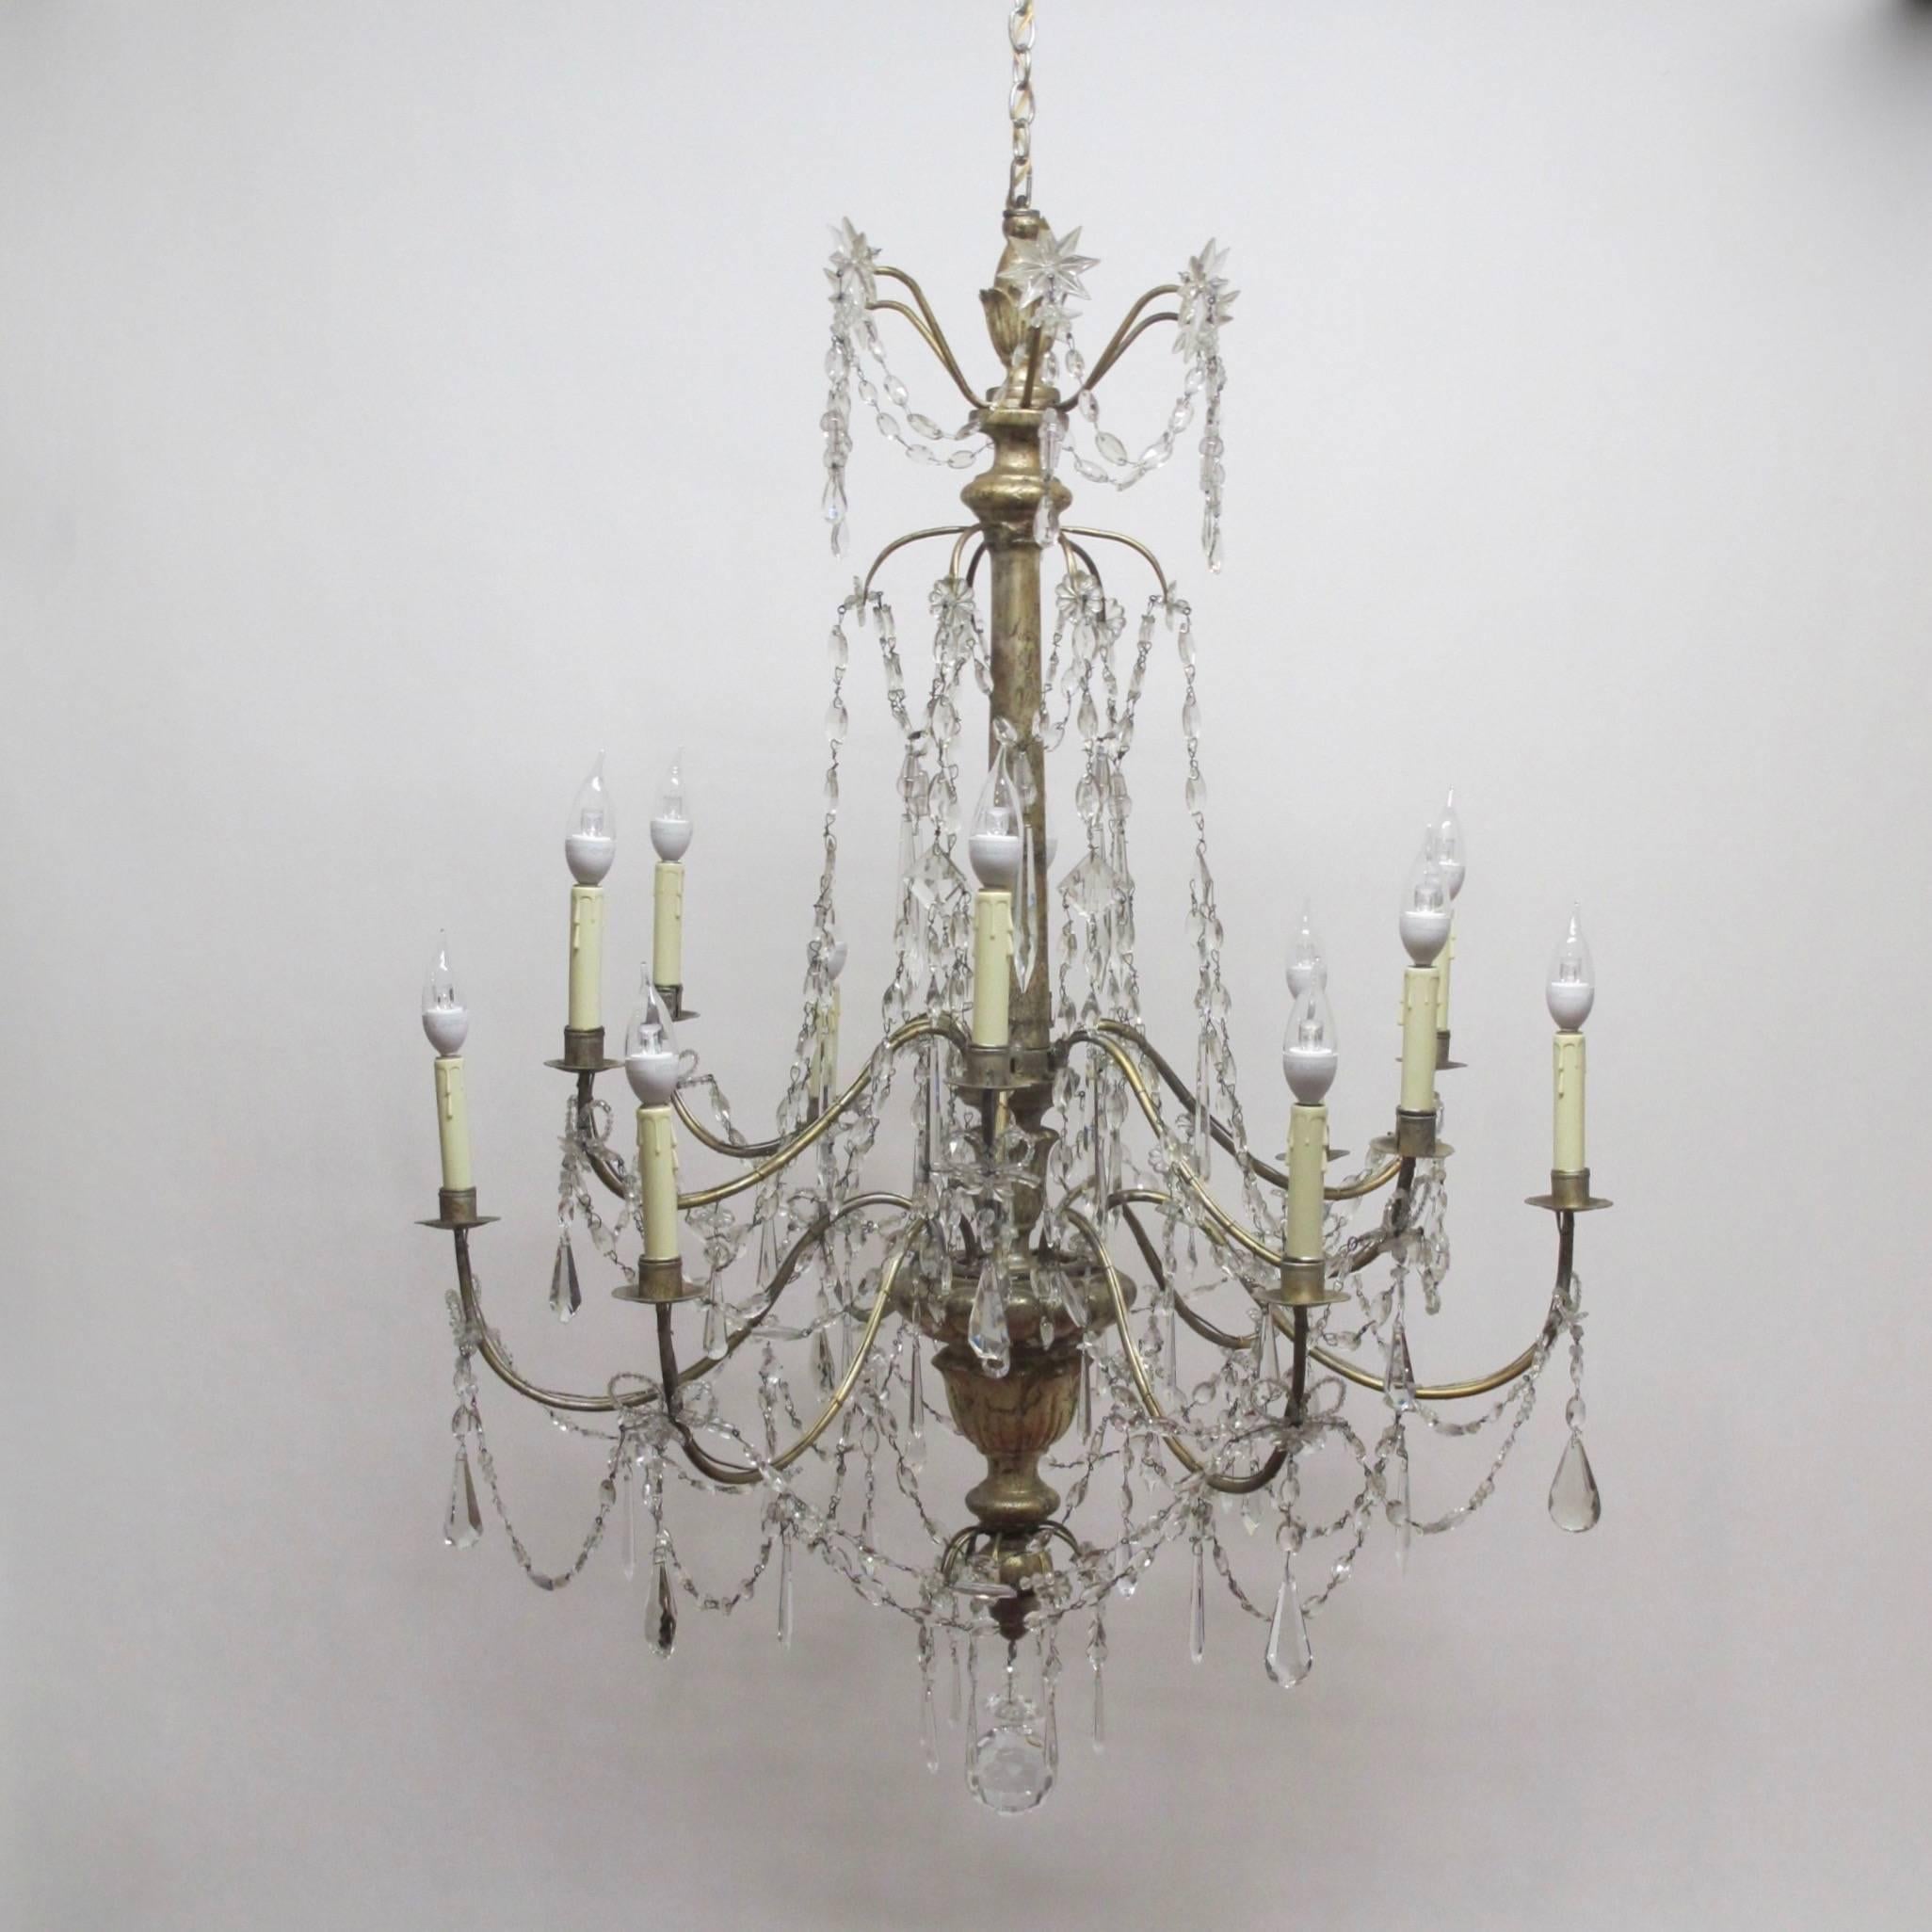 Large Silver Gilt Wood, Iron, and Crystal Chandelier, Italian 18th Century For Sale 1